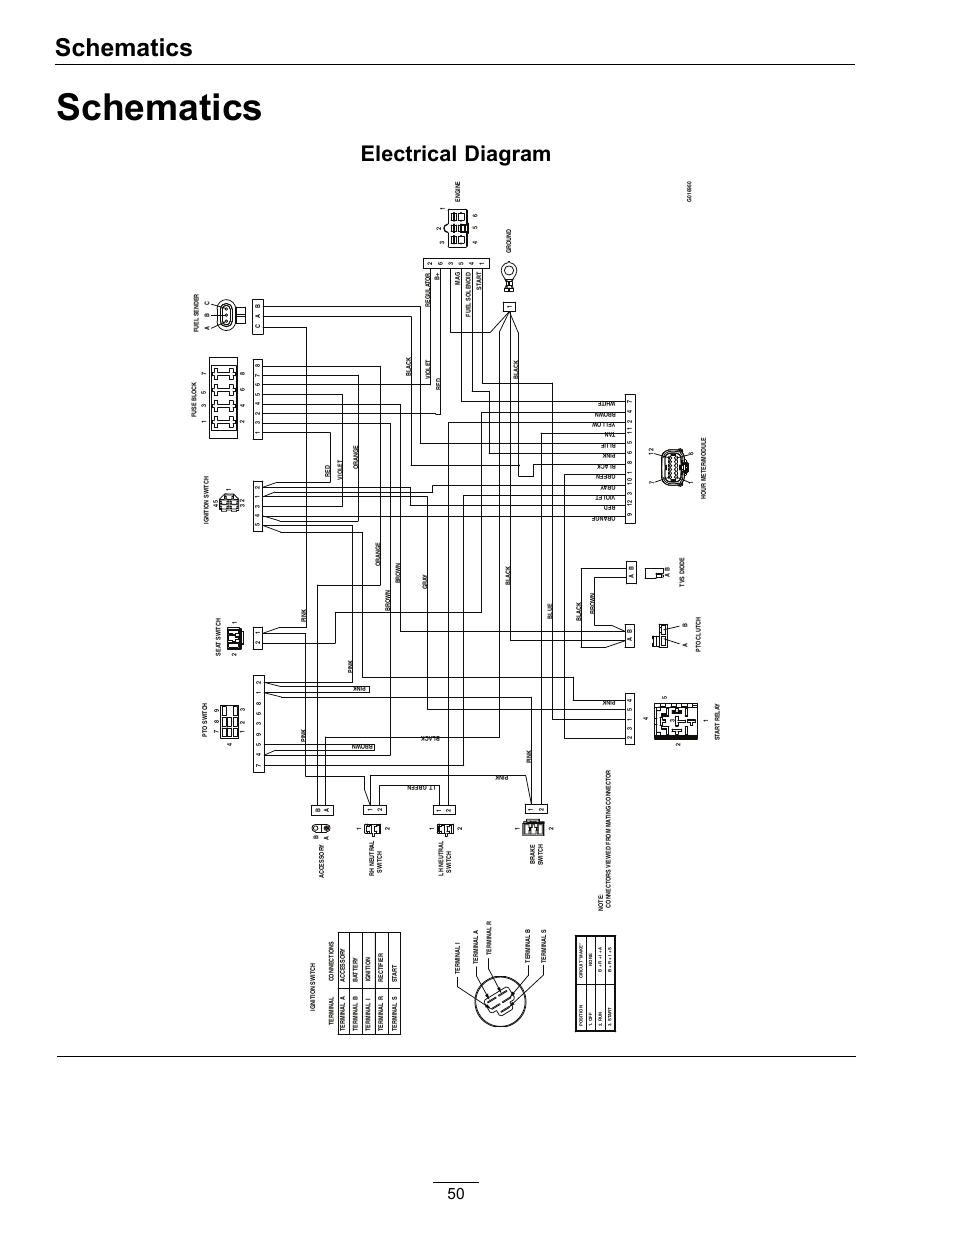 ignition switch wiring diagram for smoker craft pontoon boat